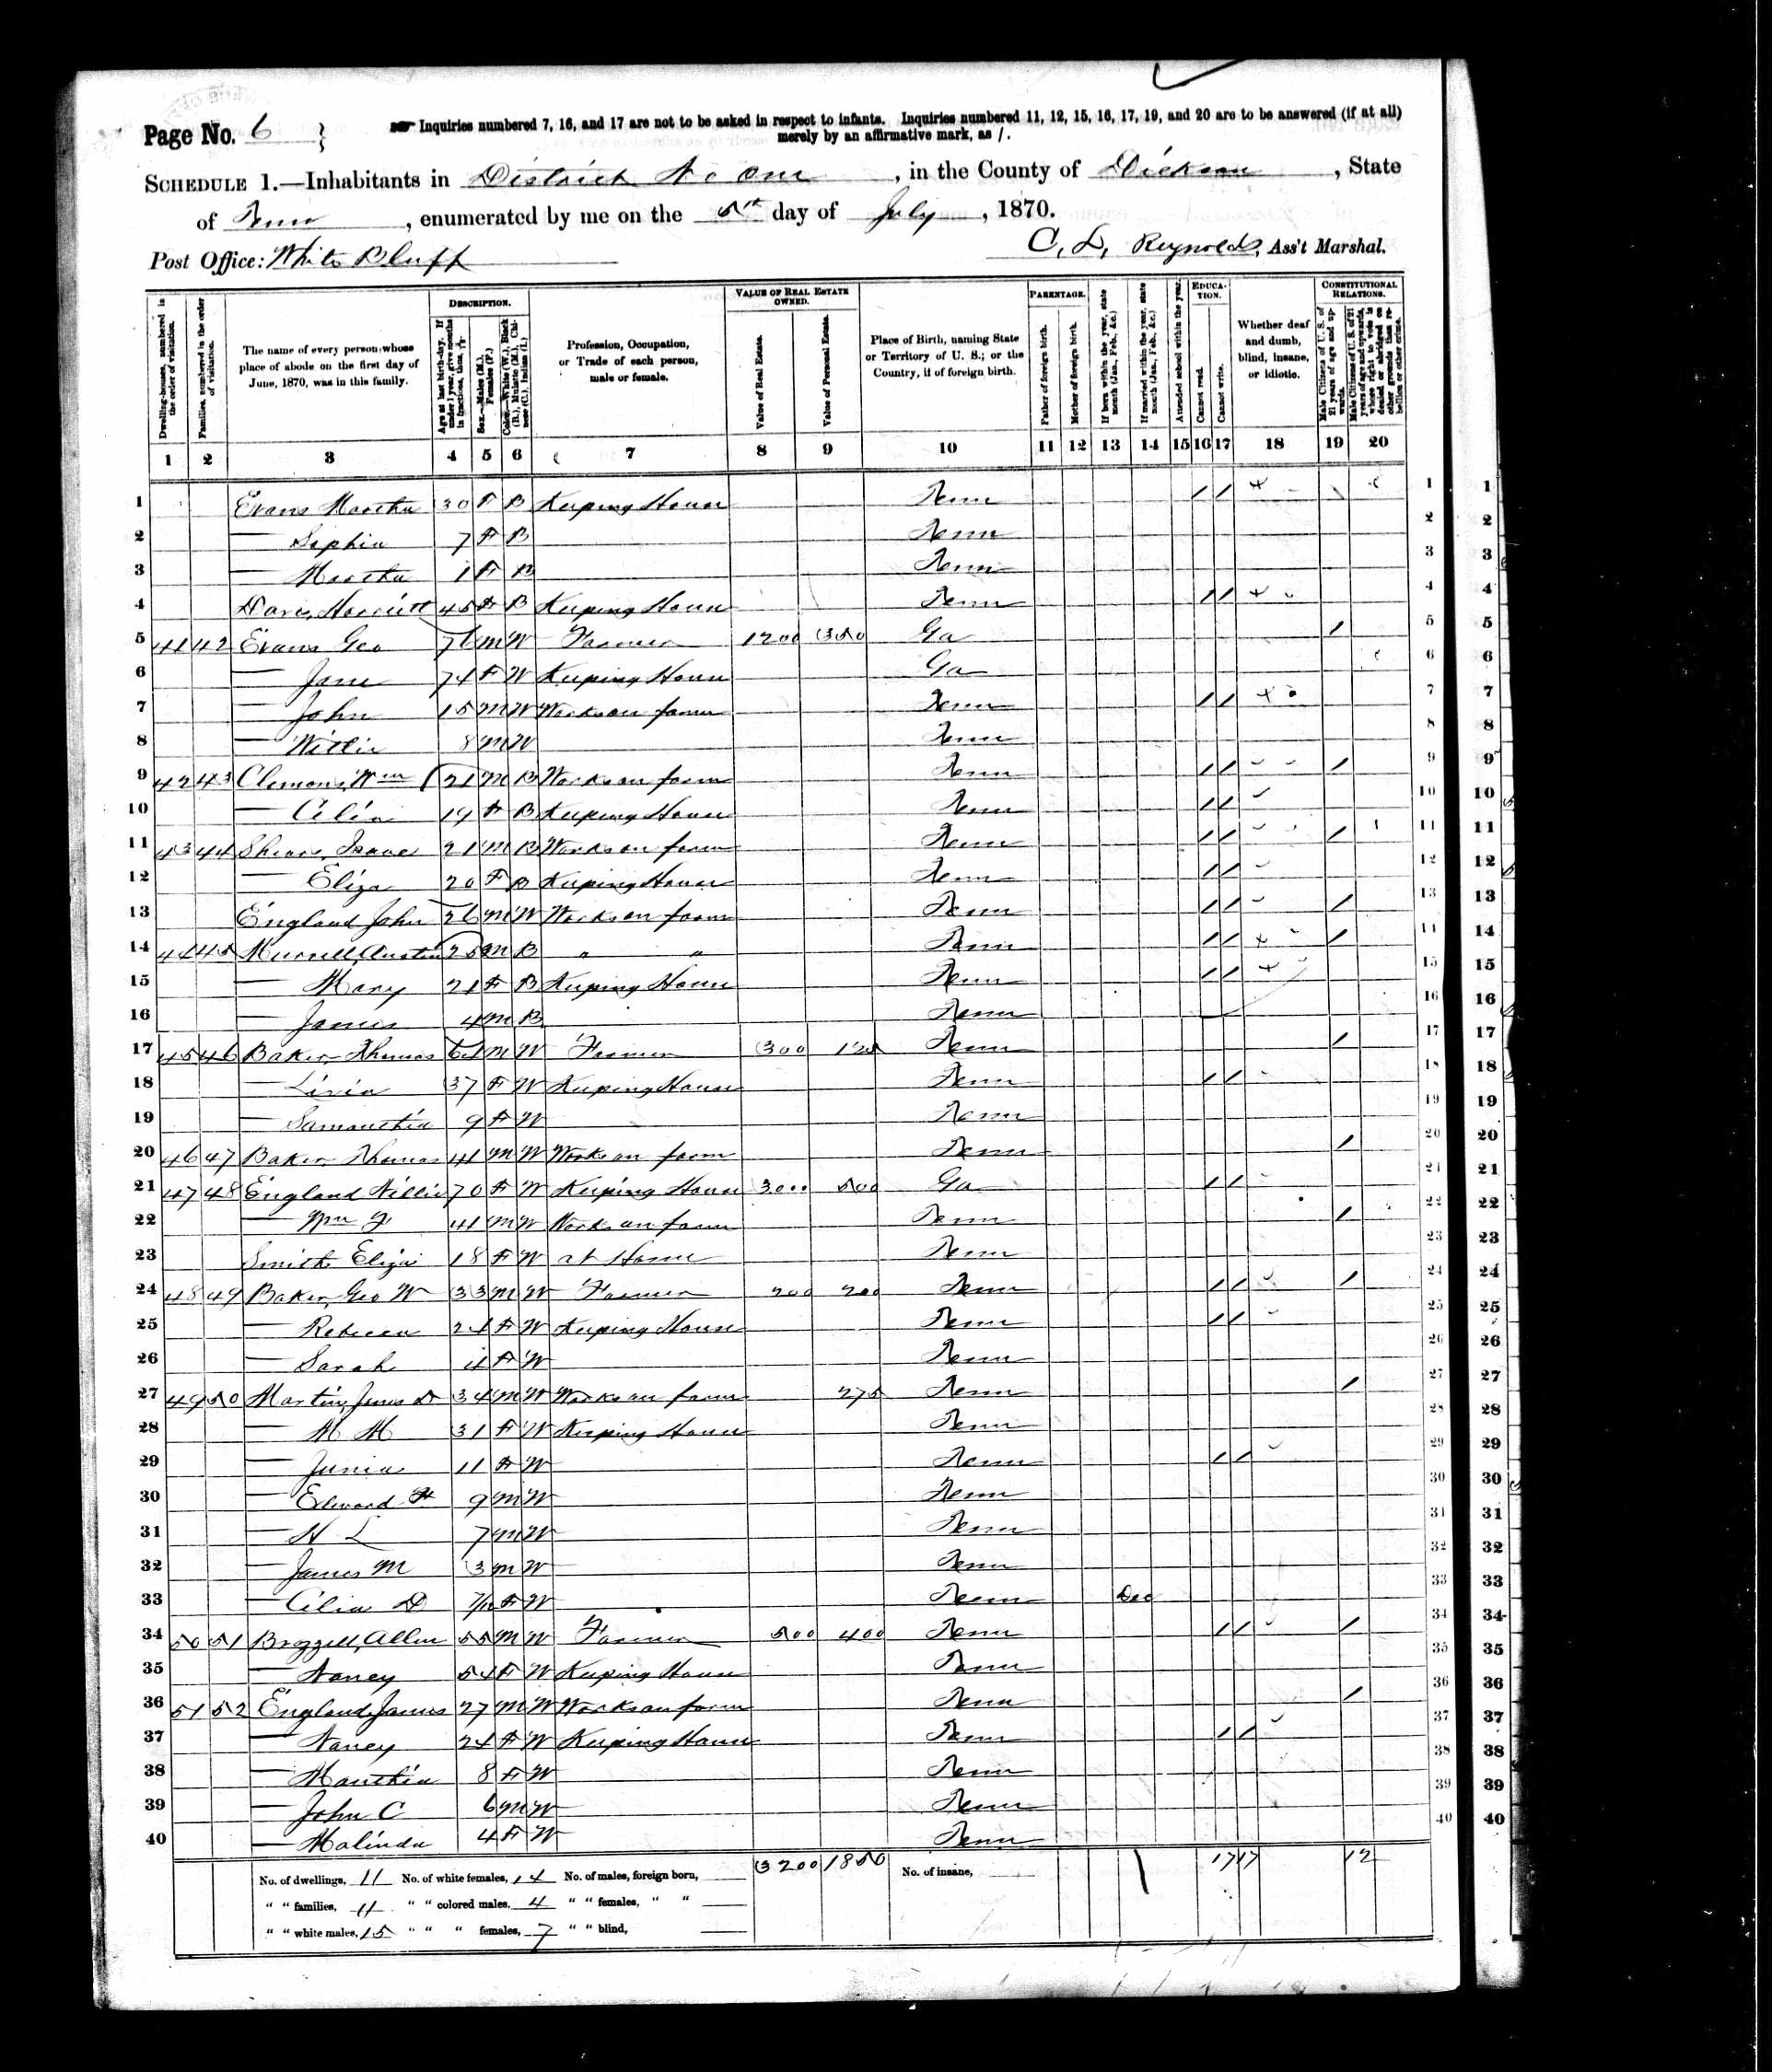 Allen Brazzell, 1870 Dickson County, Tennessee, census